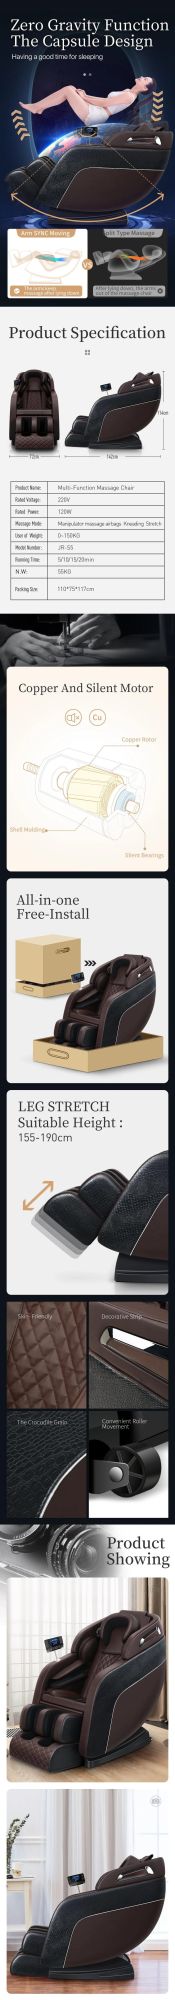 Jare S5 China Electric Relax Adjustable Reclining Massage Heating Automatic Airbag Back Vribration Massage Chair